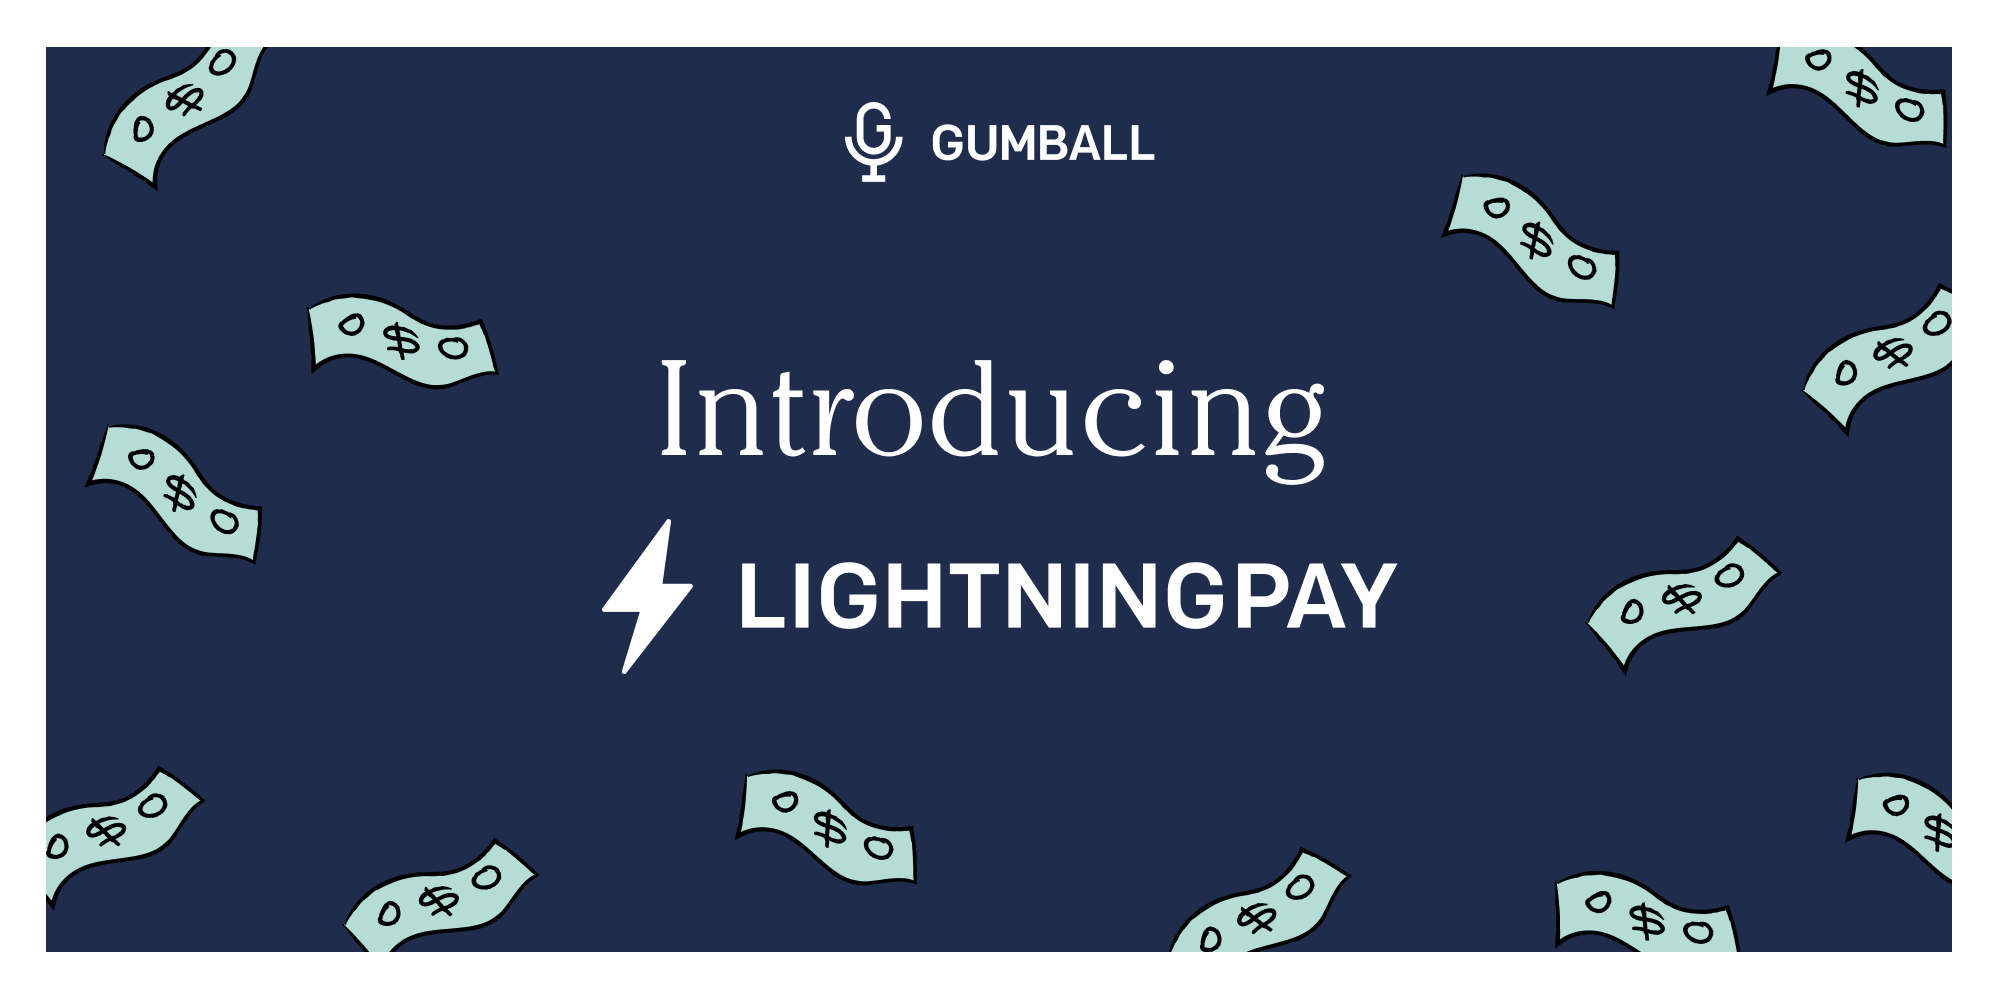 the text introducing lightningpay on a navy blue background with floating money bill emoji